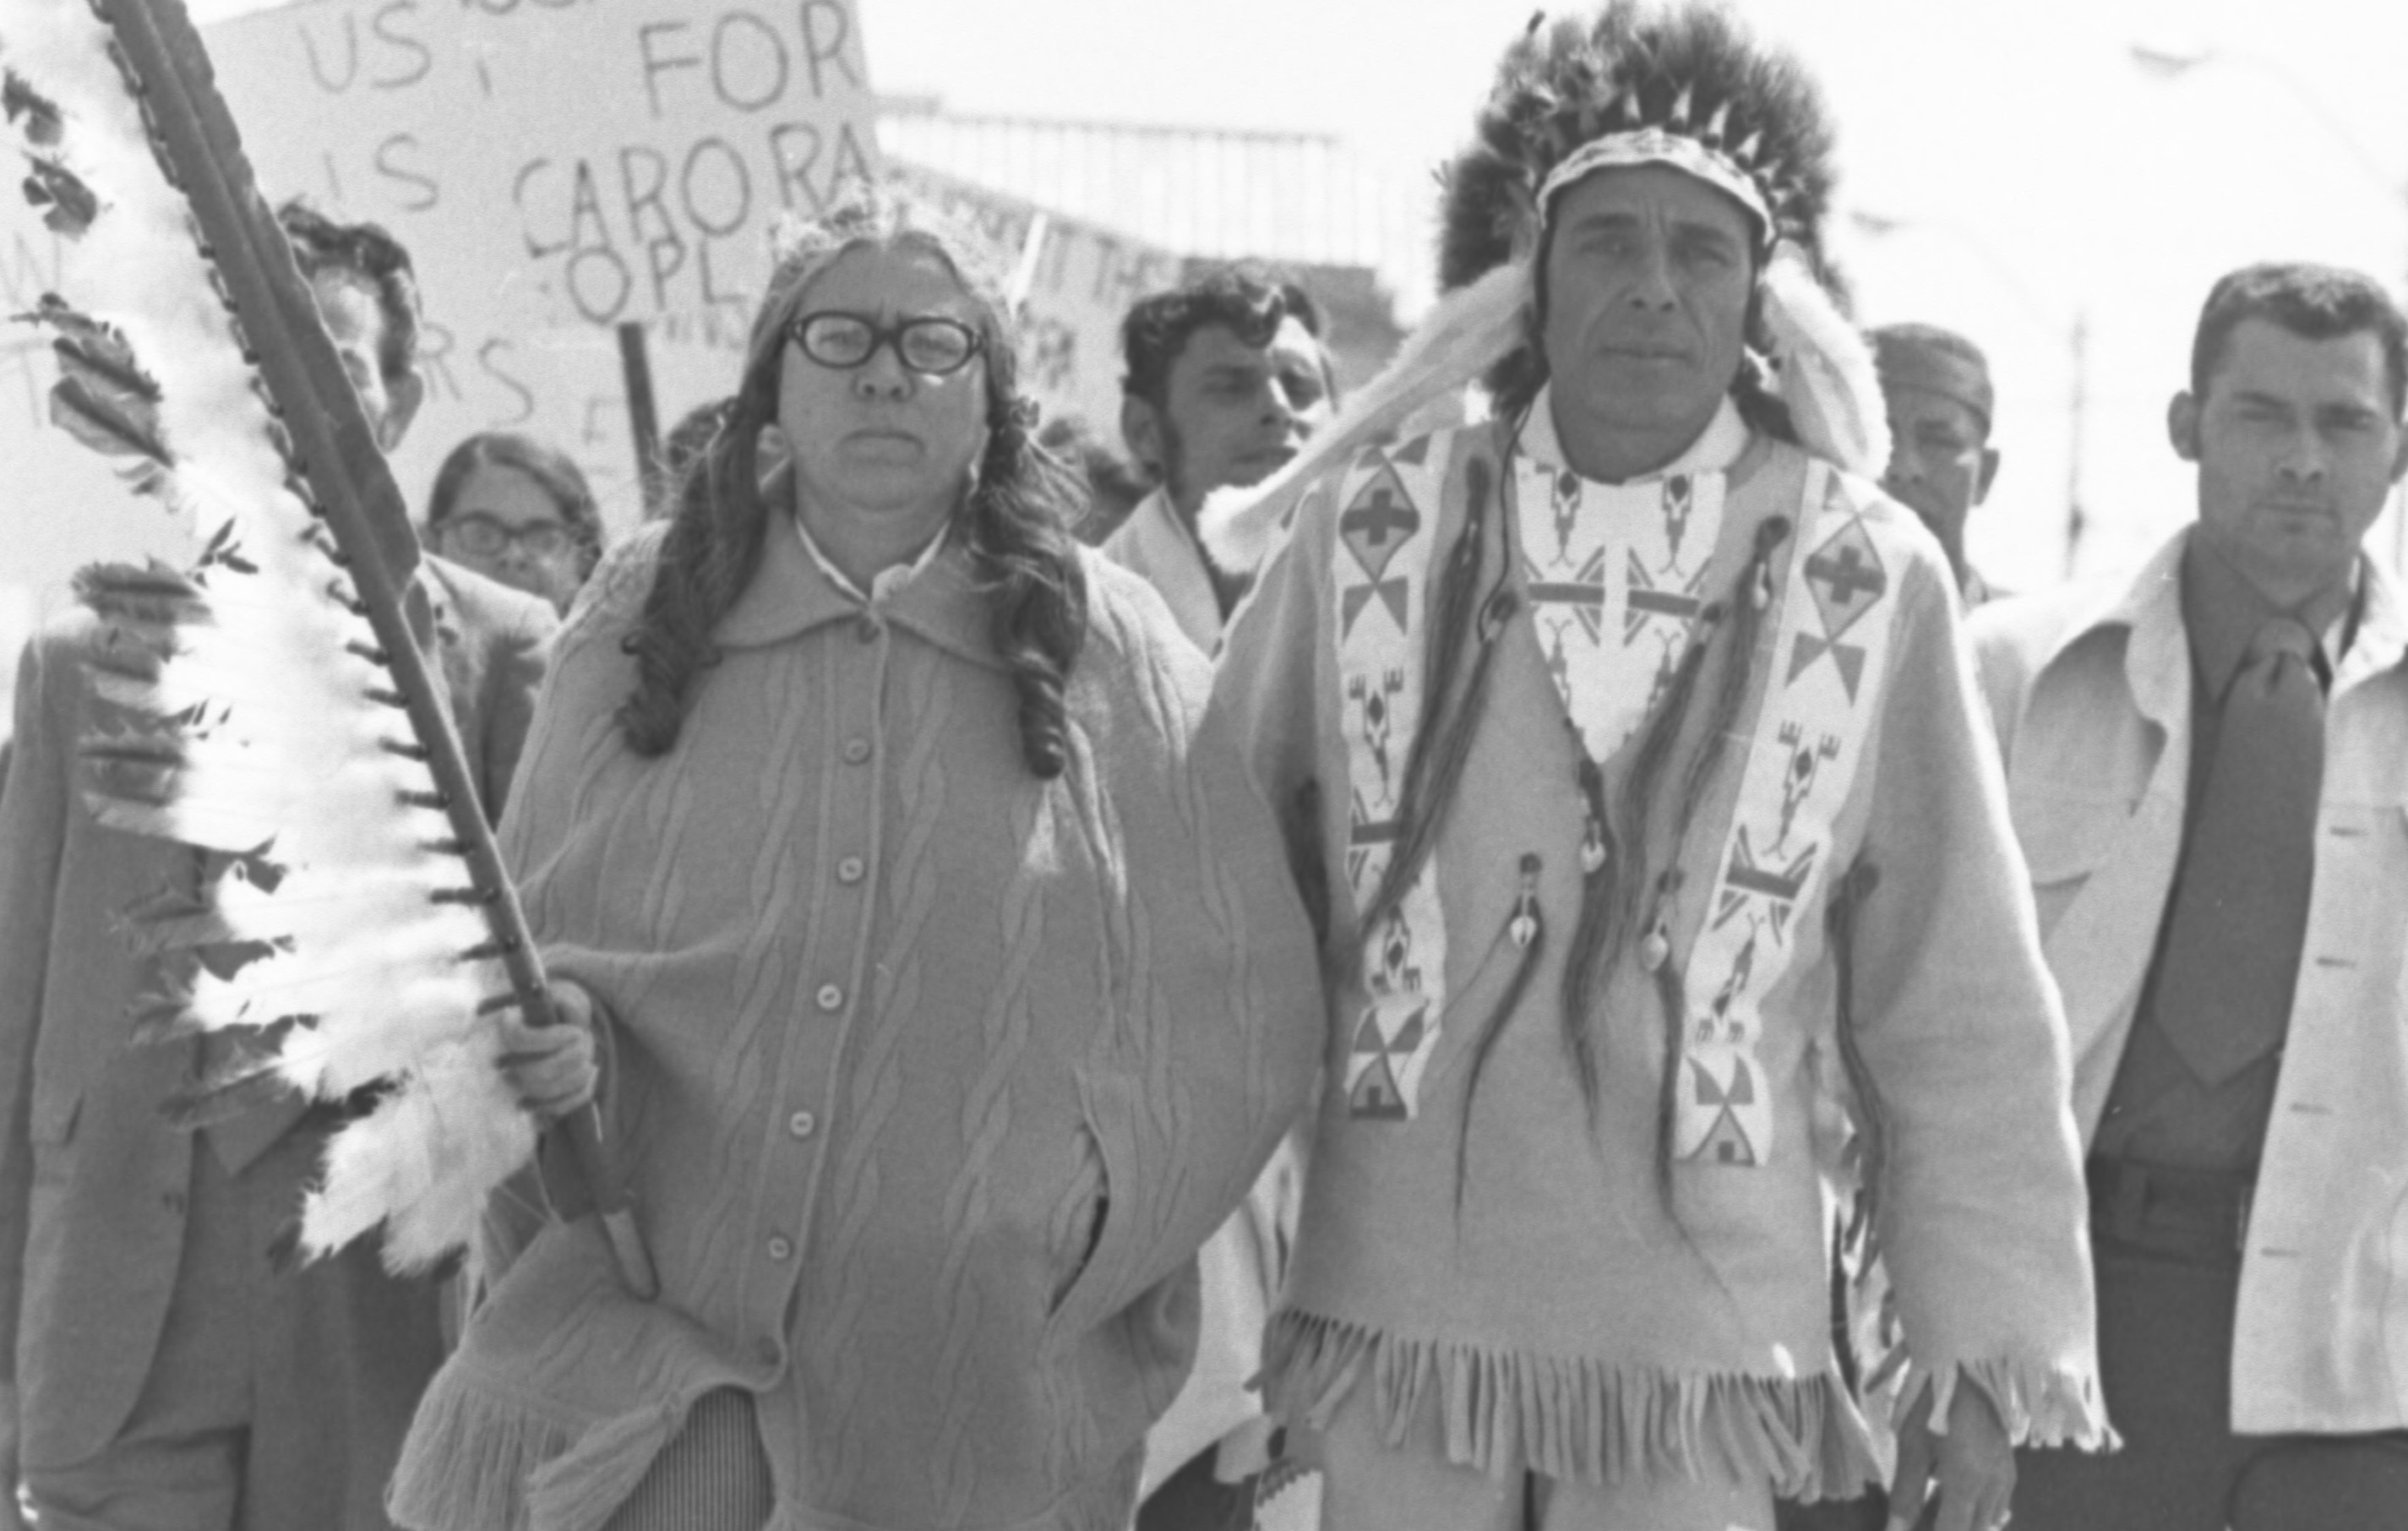 Two people in traditional dress march in front of people with protest signs